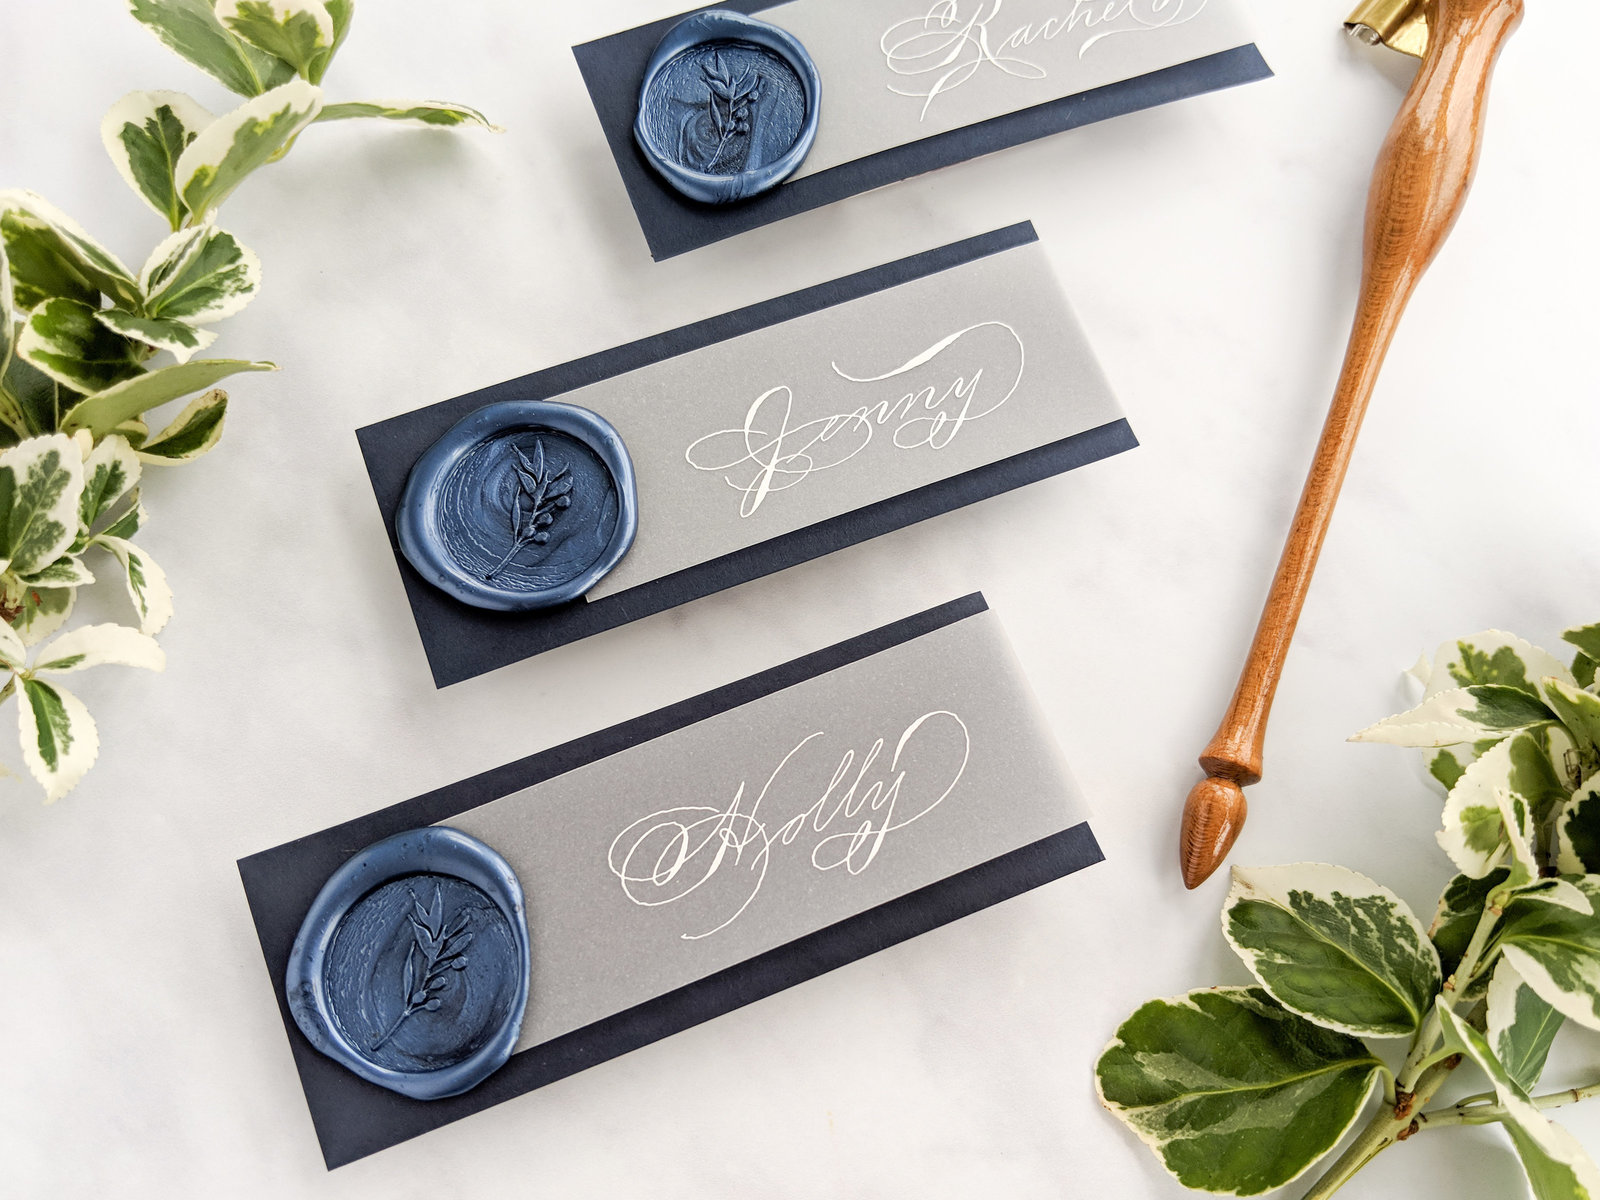 Navy and white place cards with wax seal, vellum and calligrpahy